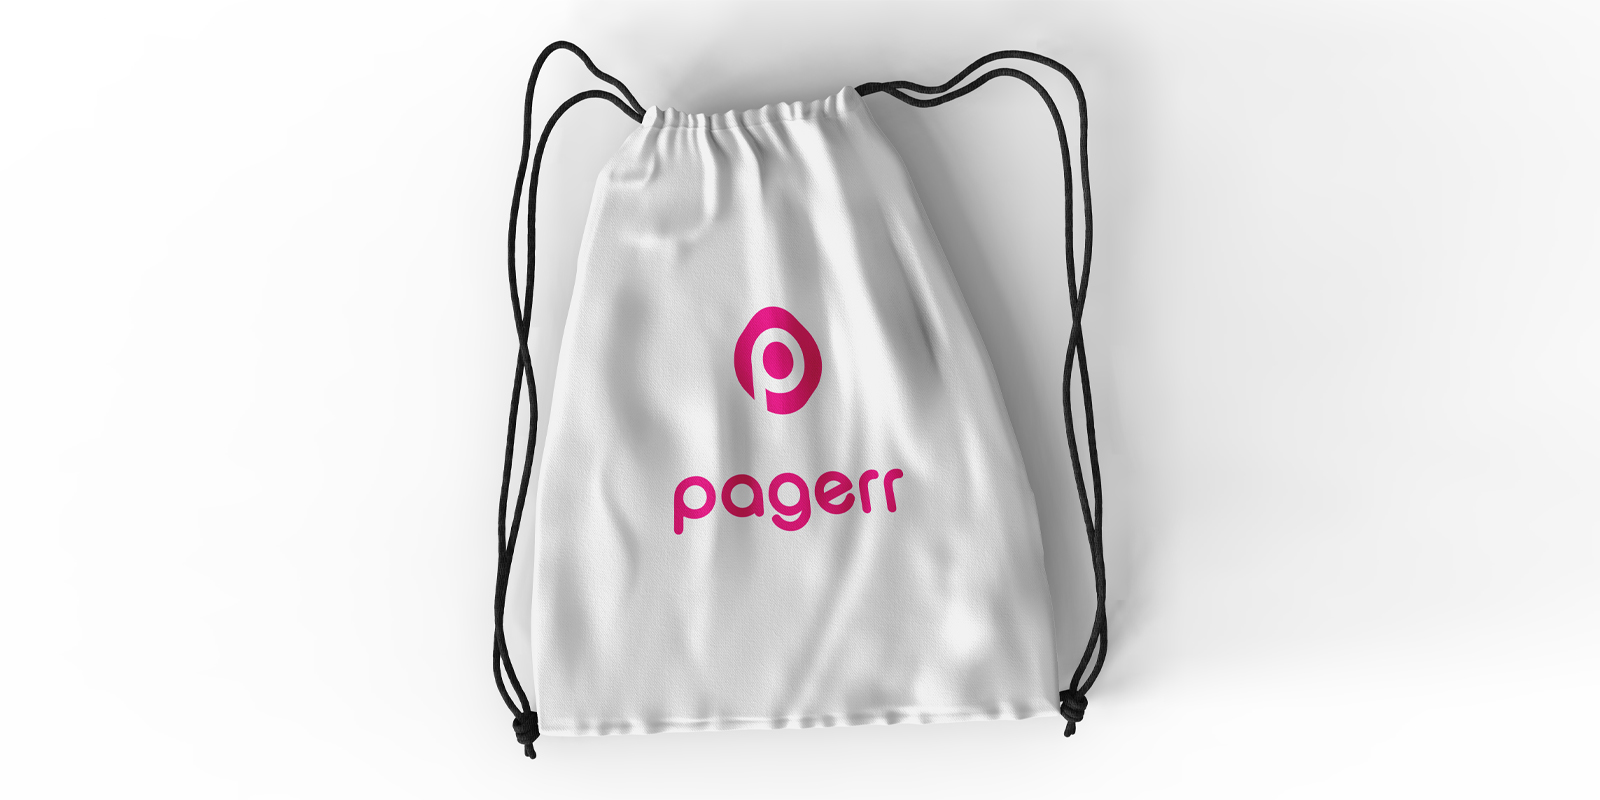 Drawstring backpacks in Melbourne - Print with Pagerr